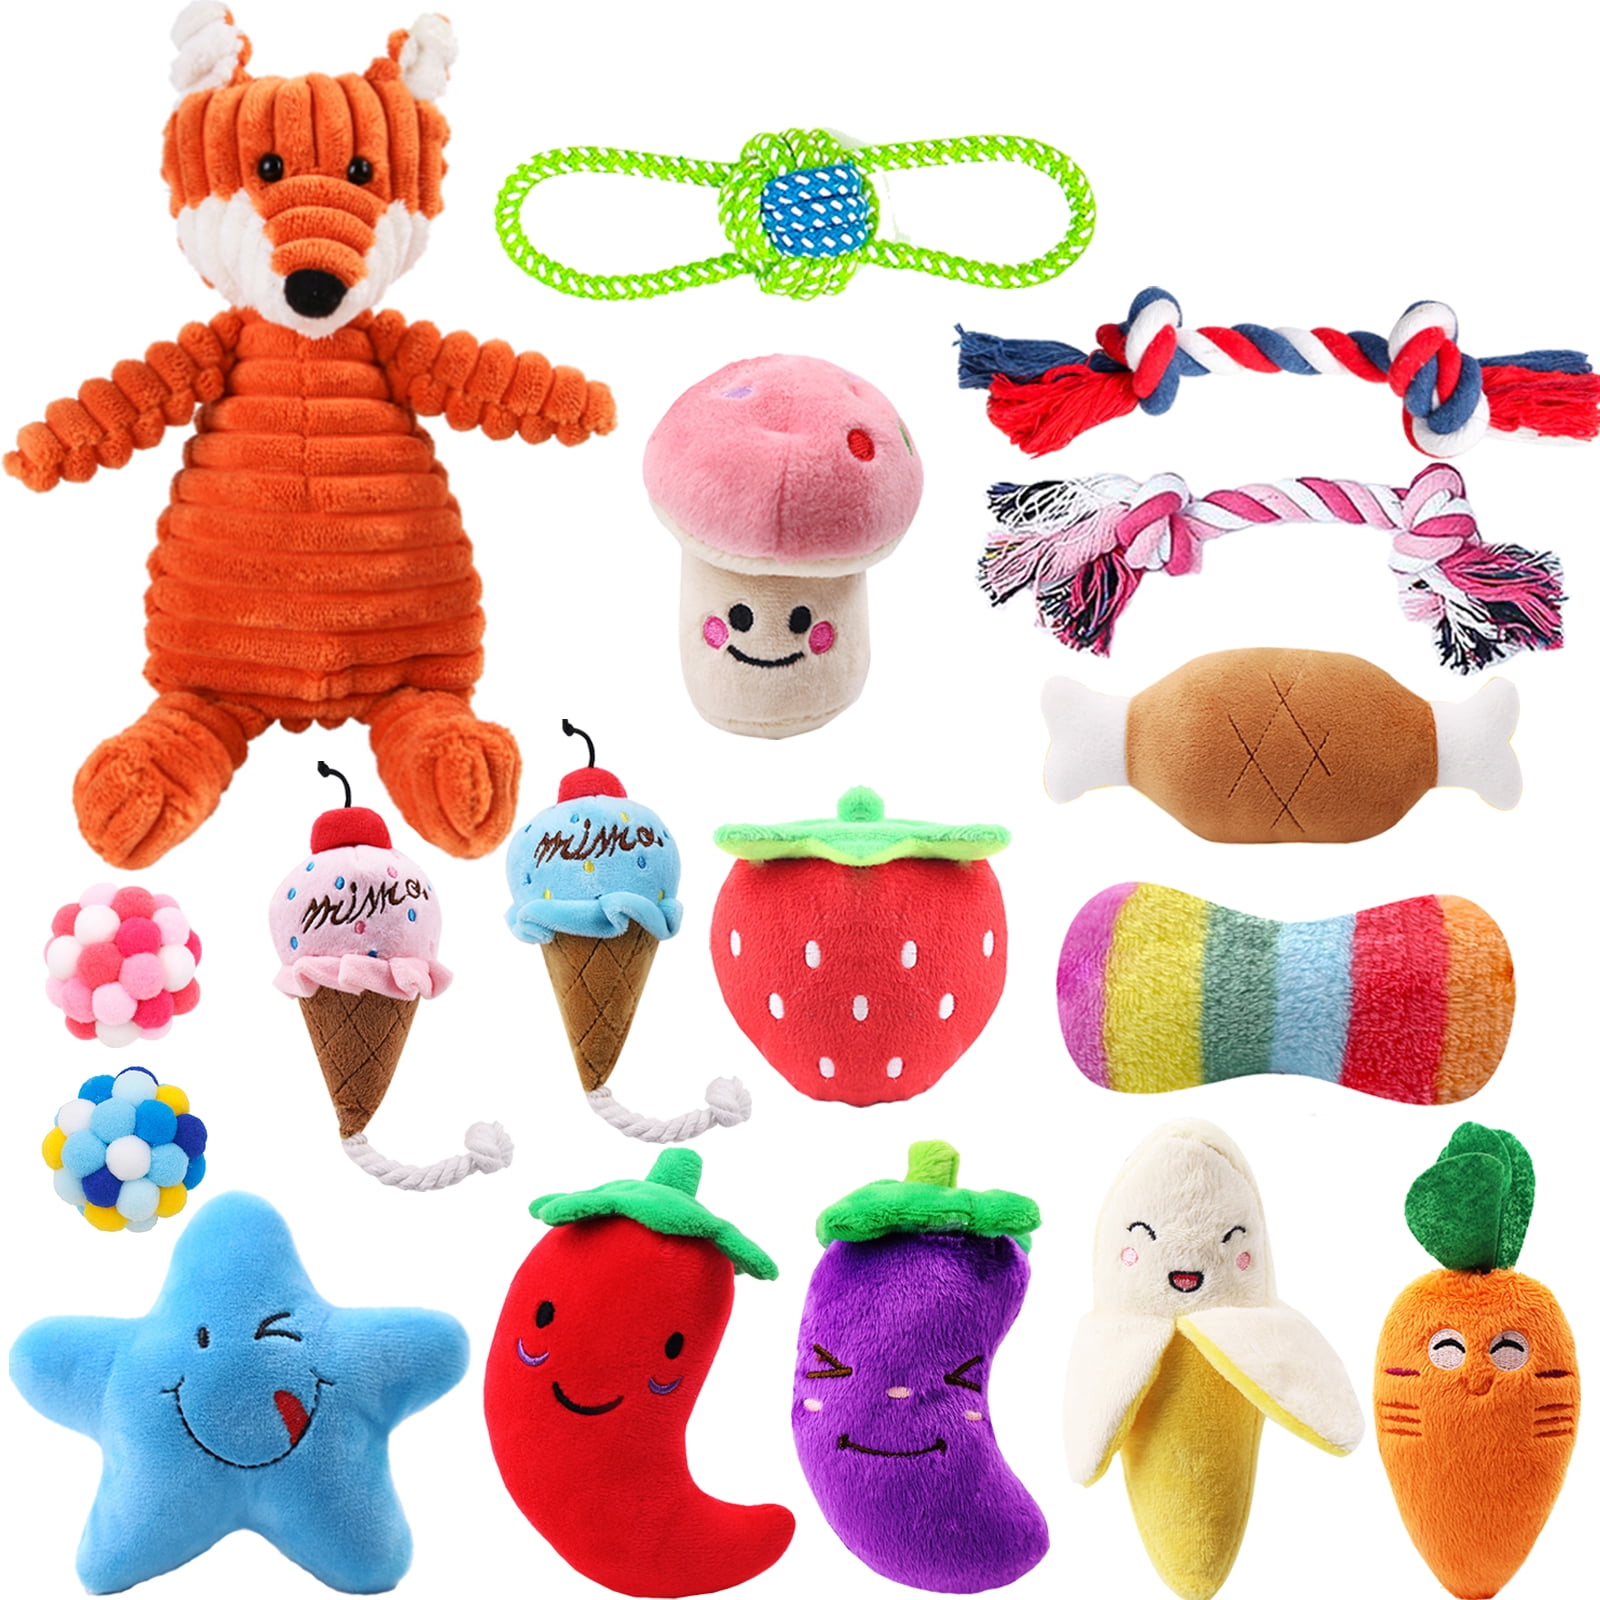 Puppy Toys, Dog Toys Plush Squeaky Dog Toy Pack of 1-3, Cute Dog Plush Interactive Toys, Stuffed Animal Dog Toys for Small Dogs, Small Dog Toys Pet